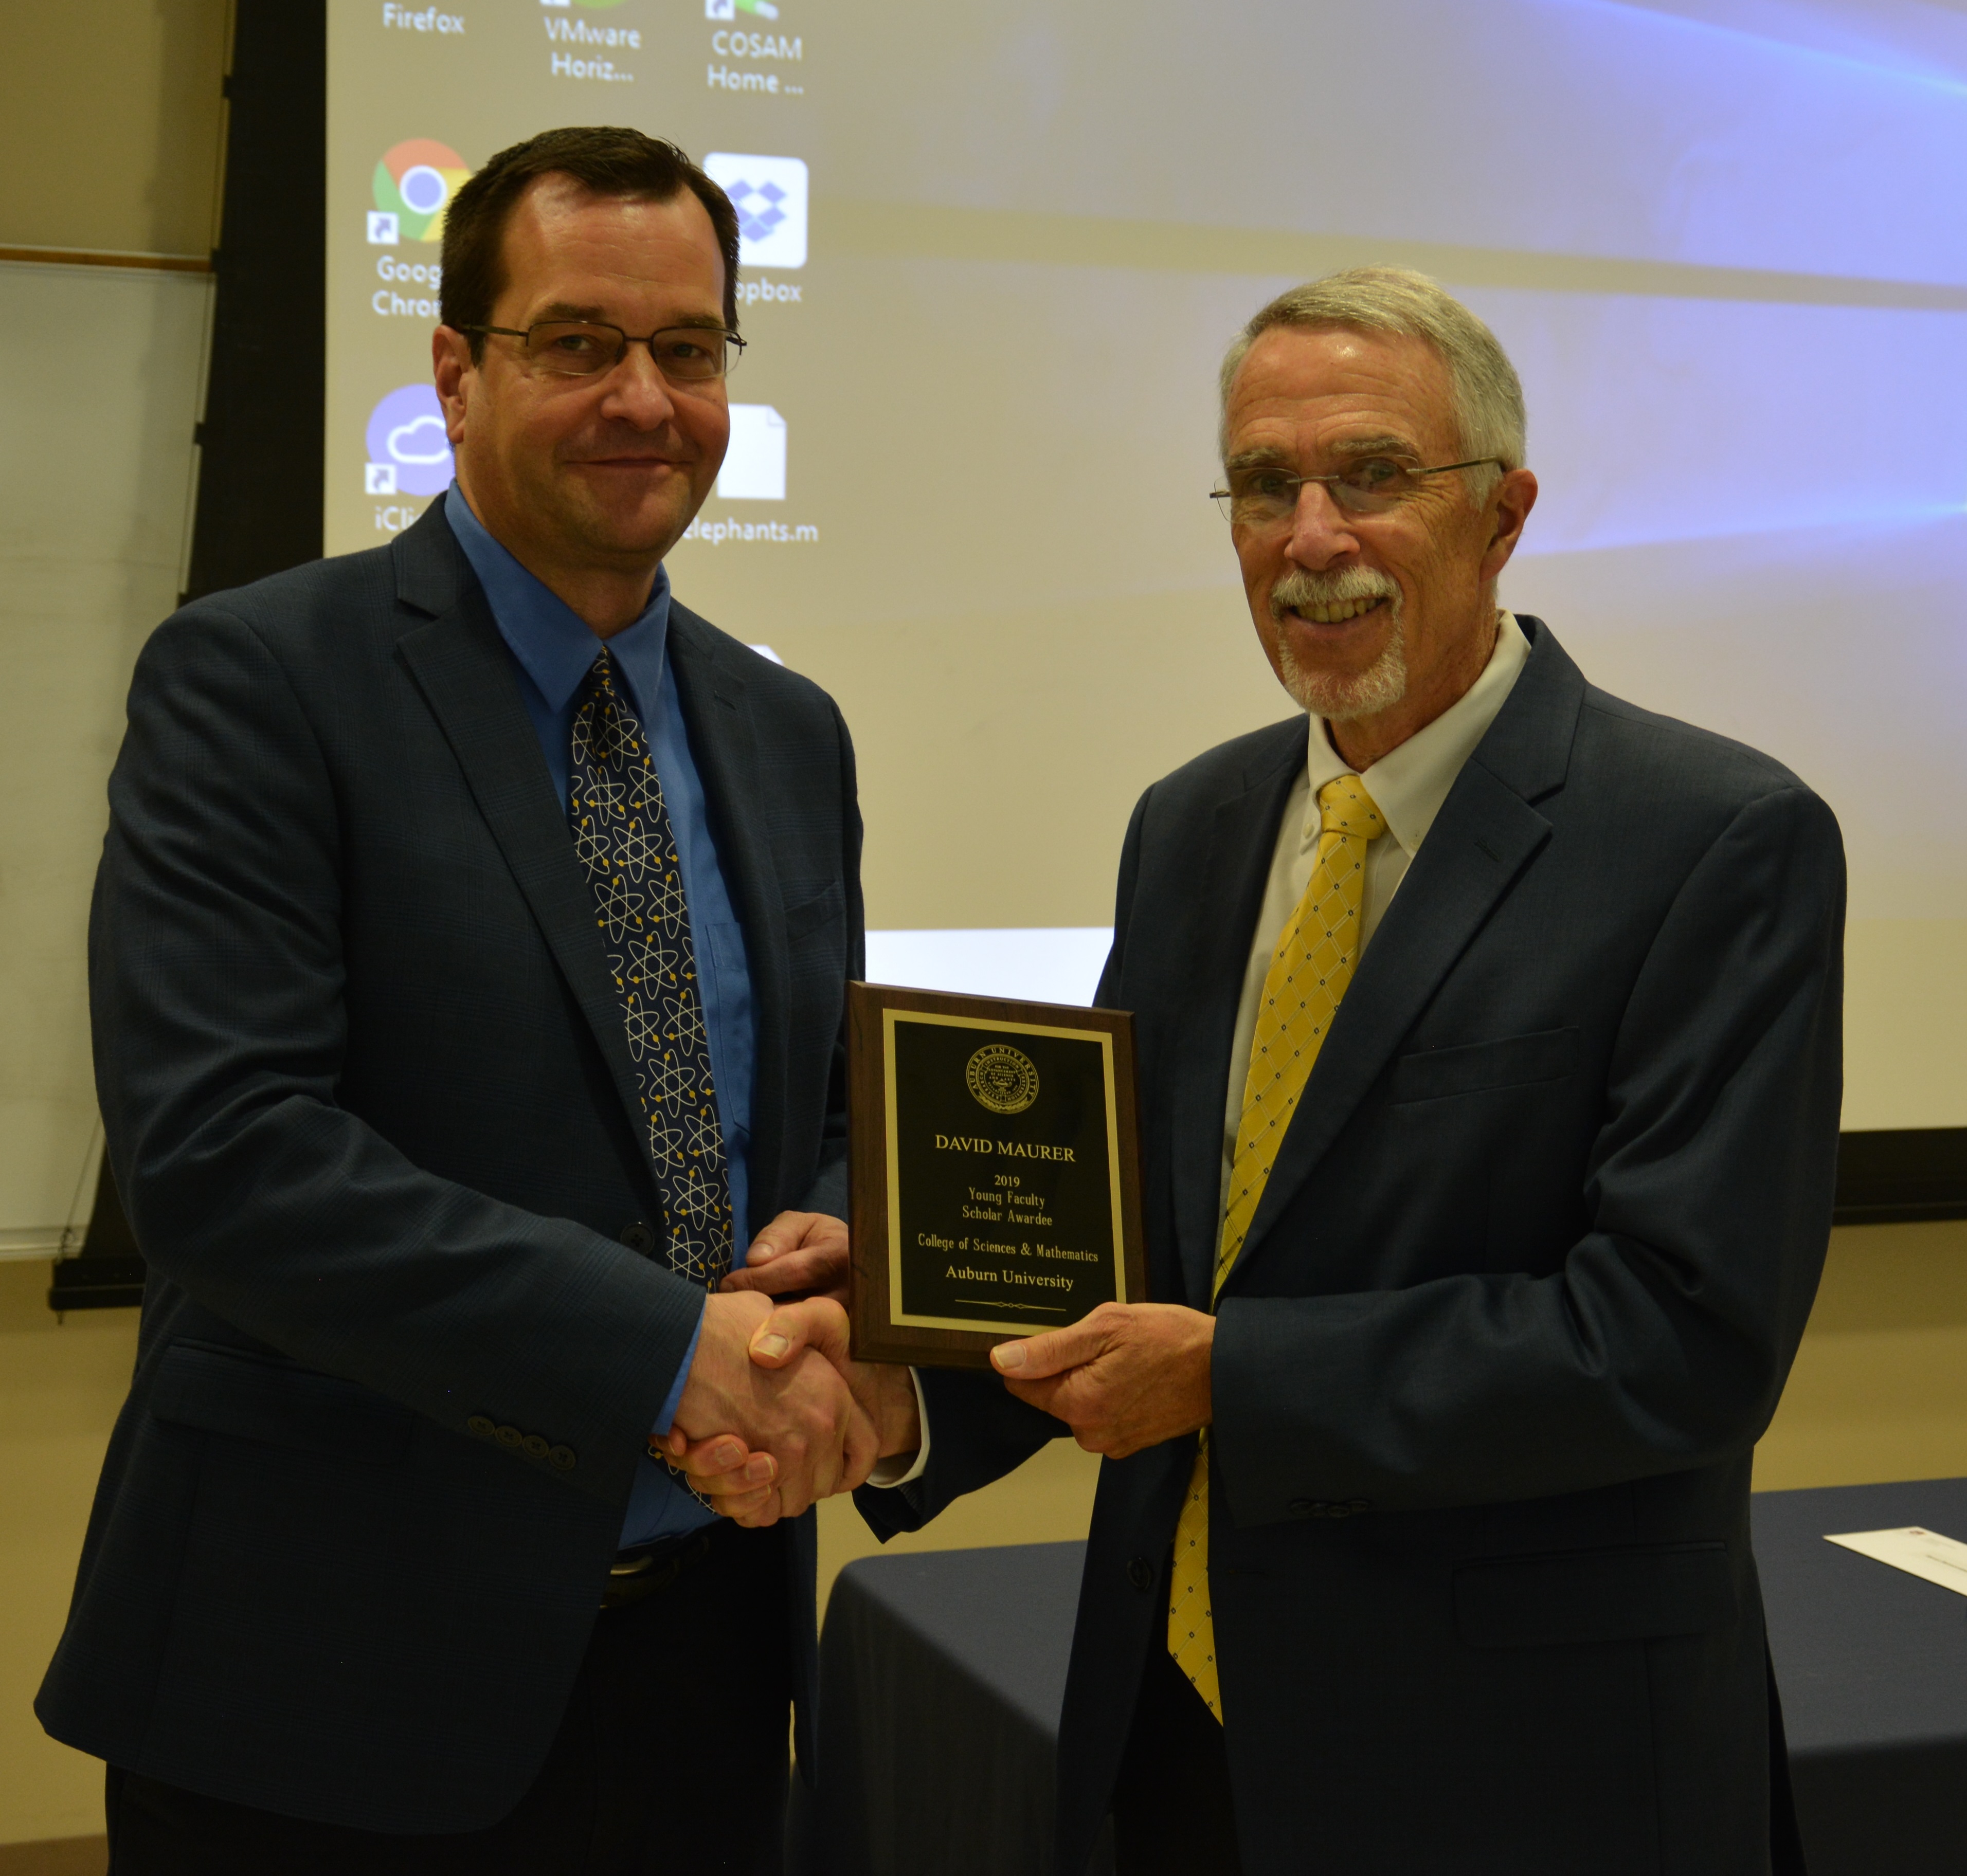 Dr. David Maurer, professor in the Department of Physics, receives the award as the Young Faculty Scholar Awardee from Dean Giordano.